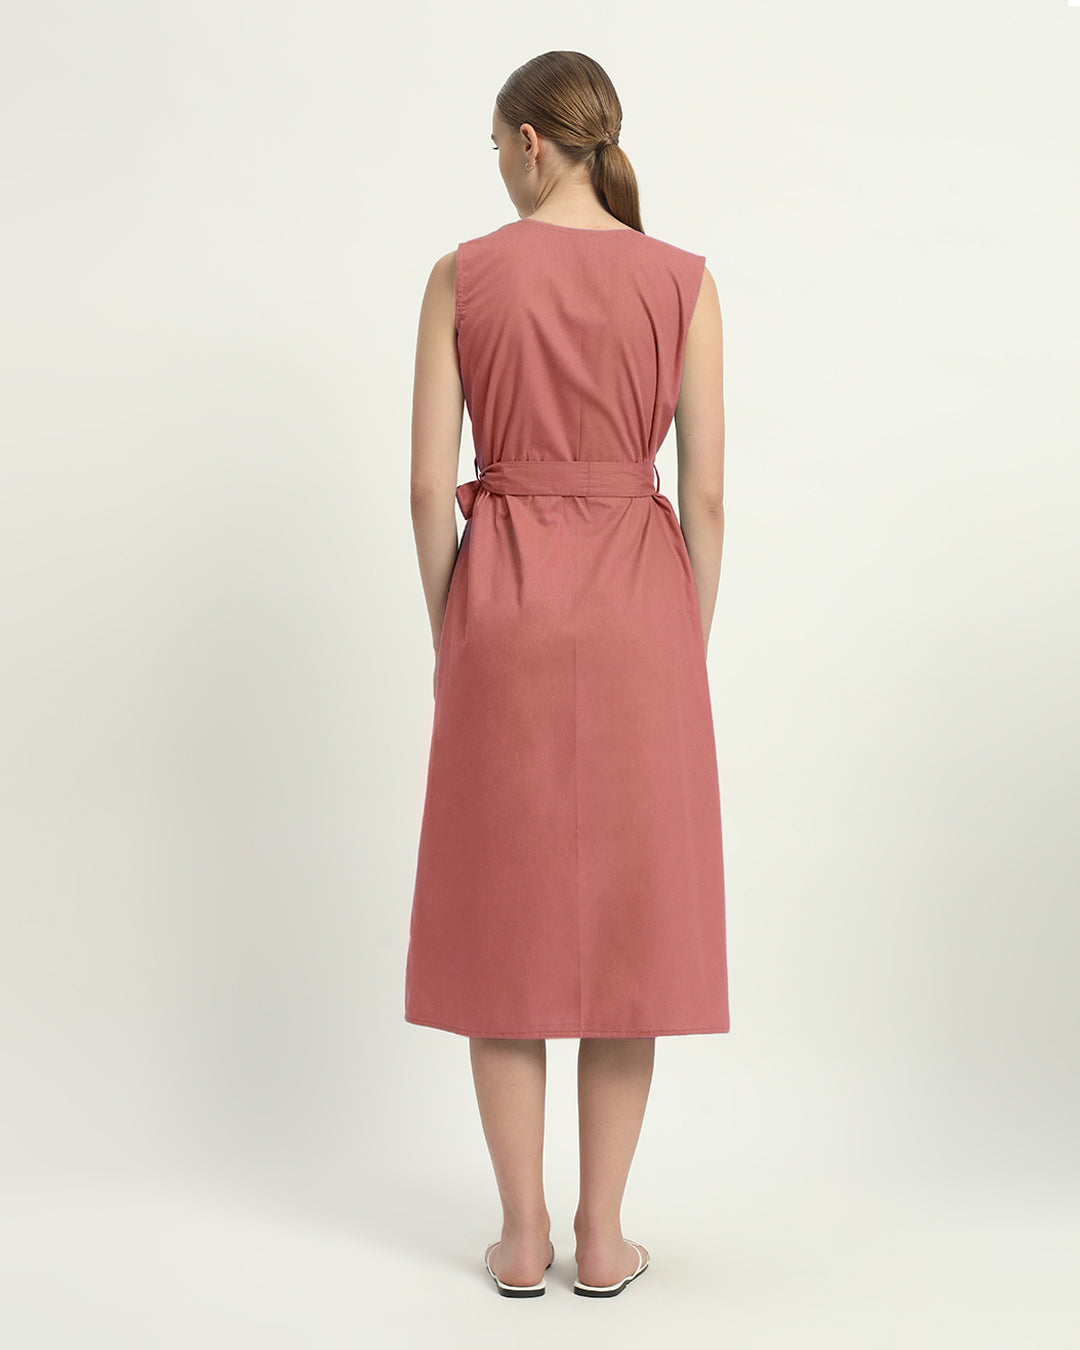 The Ivory Pink Windsor Cotton Dress